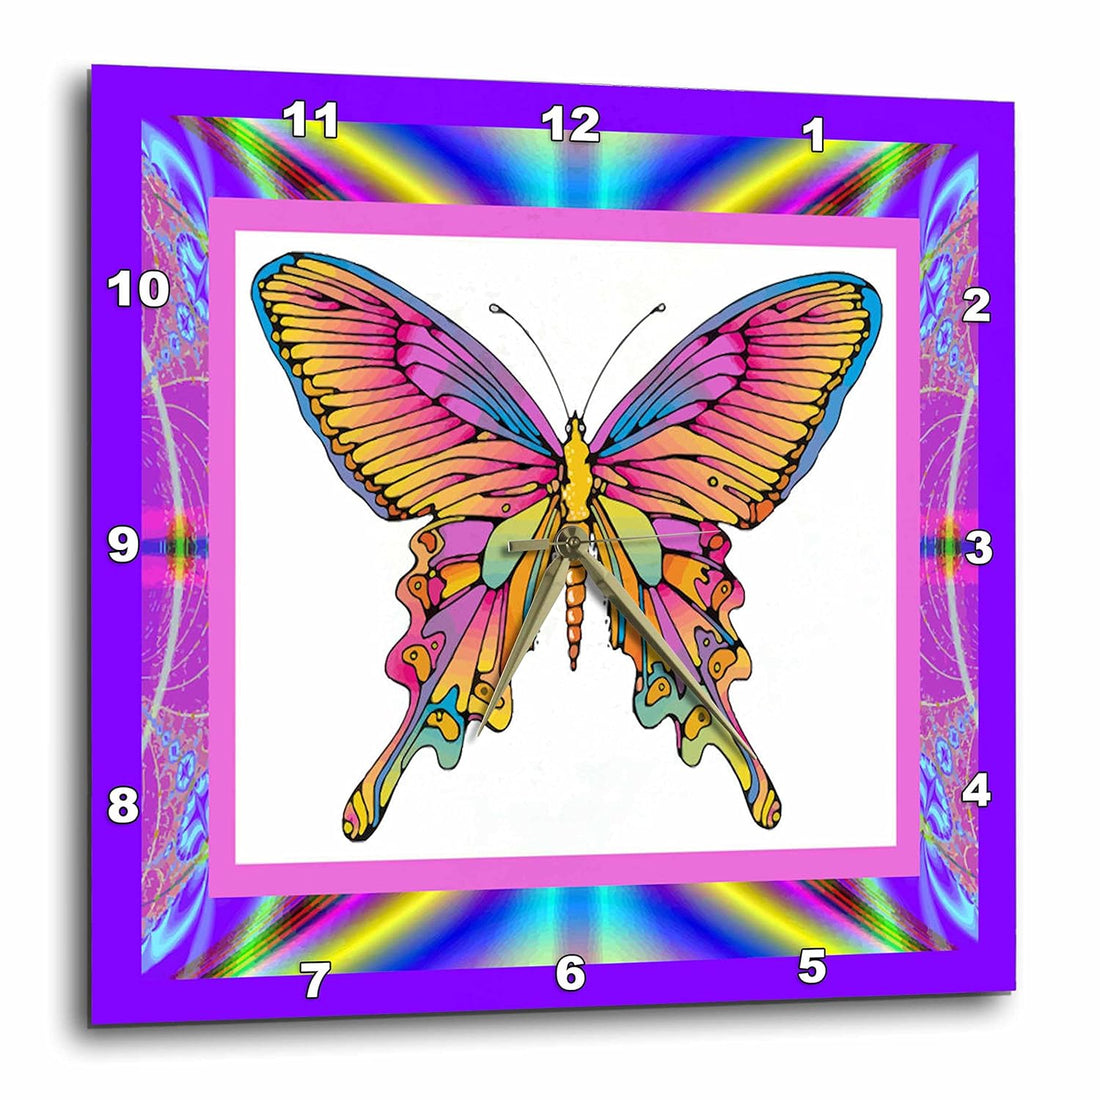 3dRose DPP_14923_1 Psychedelic Butterfly Wall Clock, 10 by 10-Inch